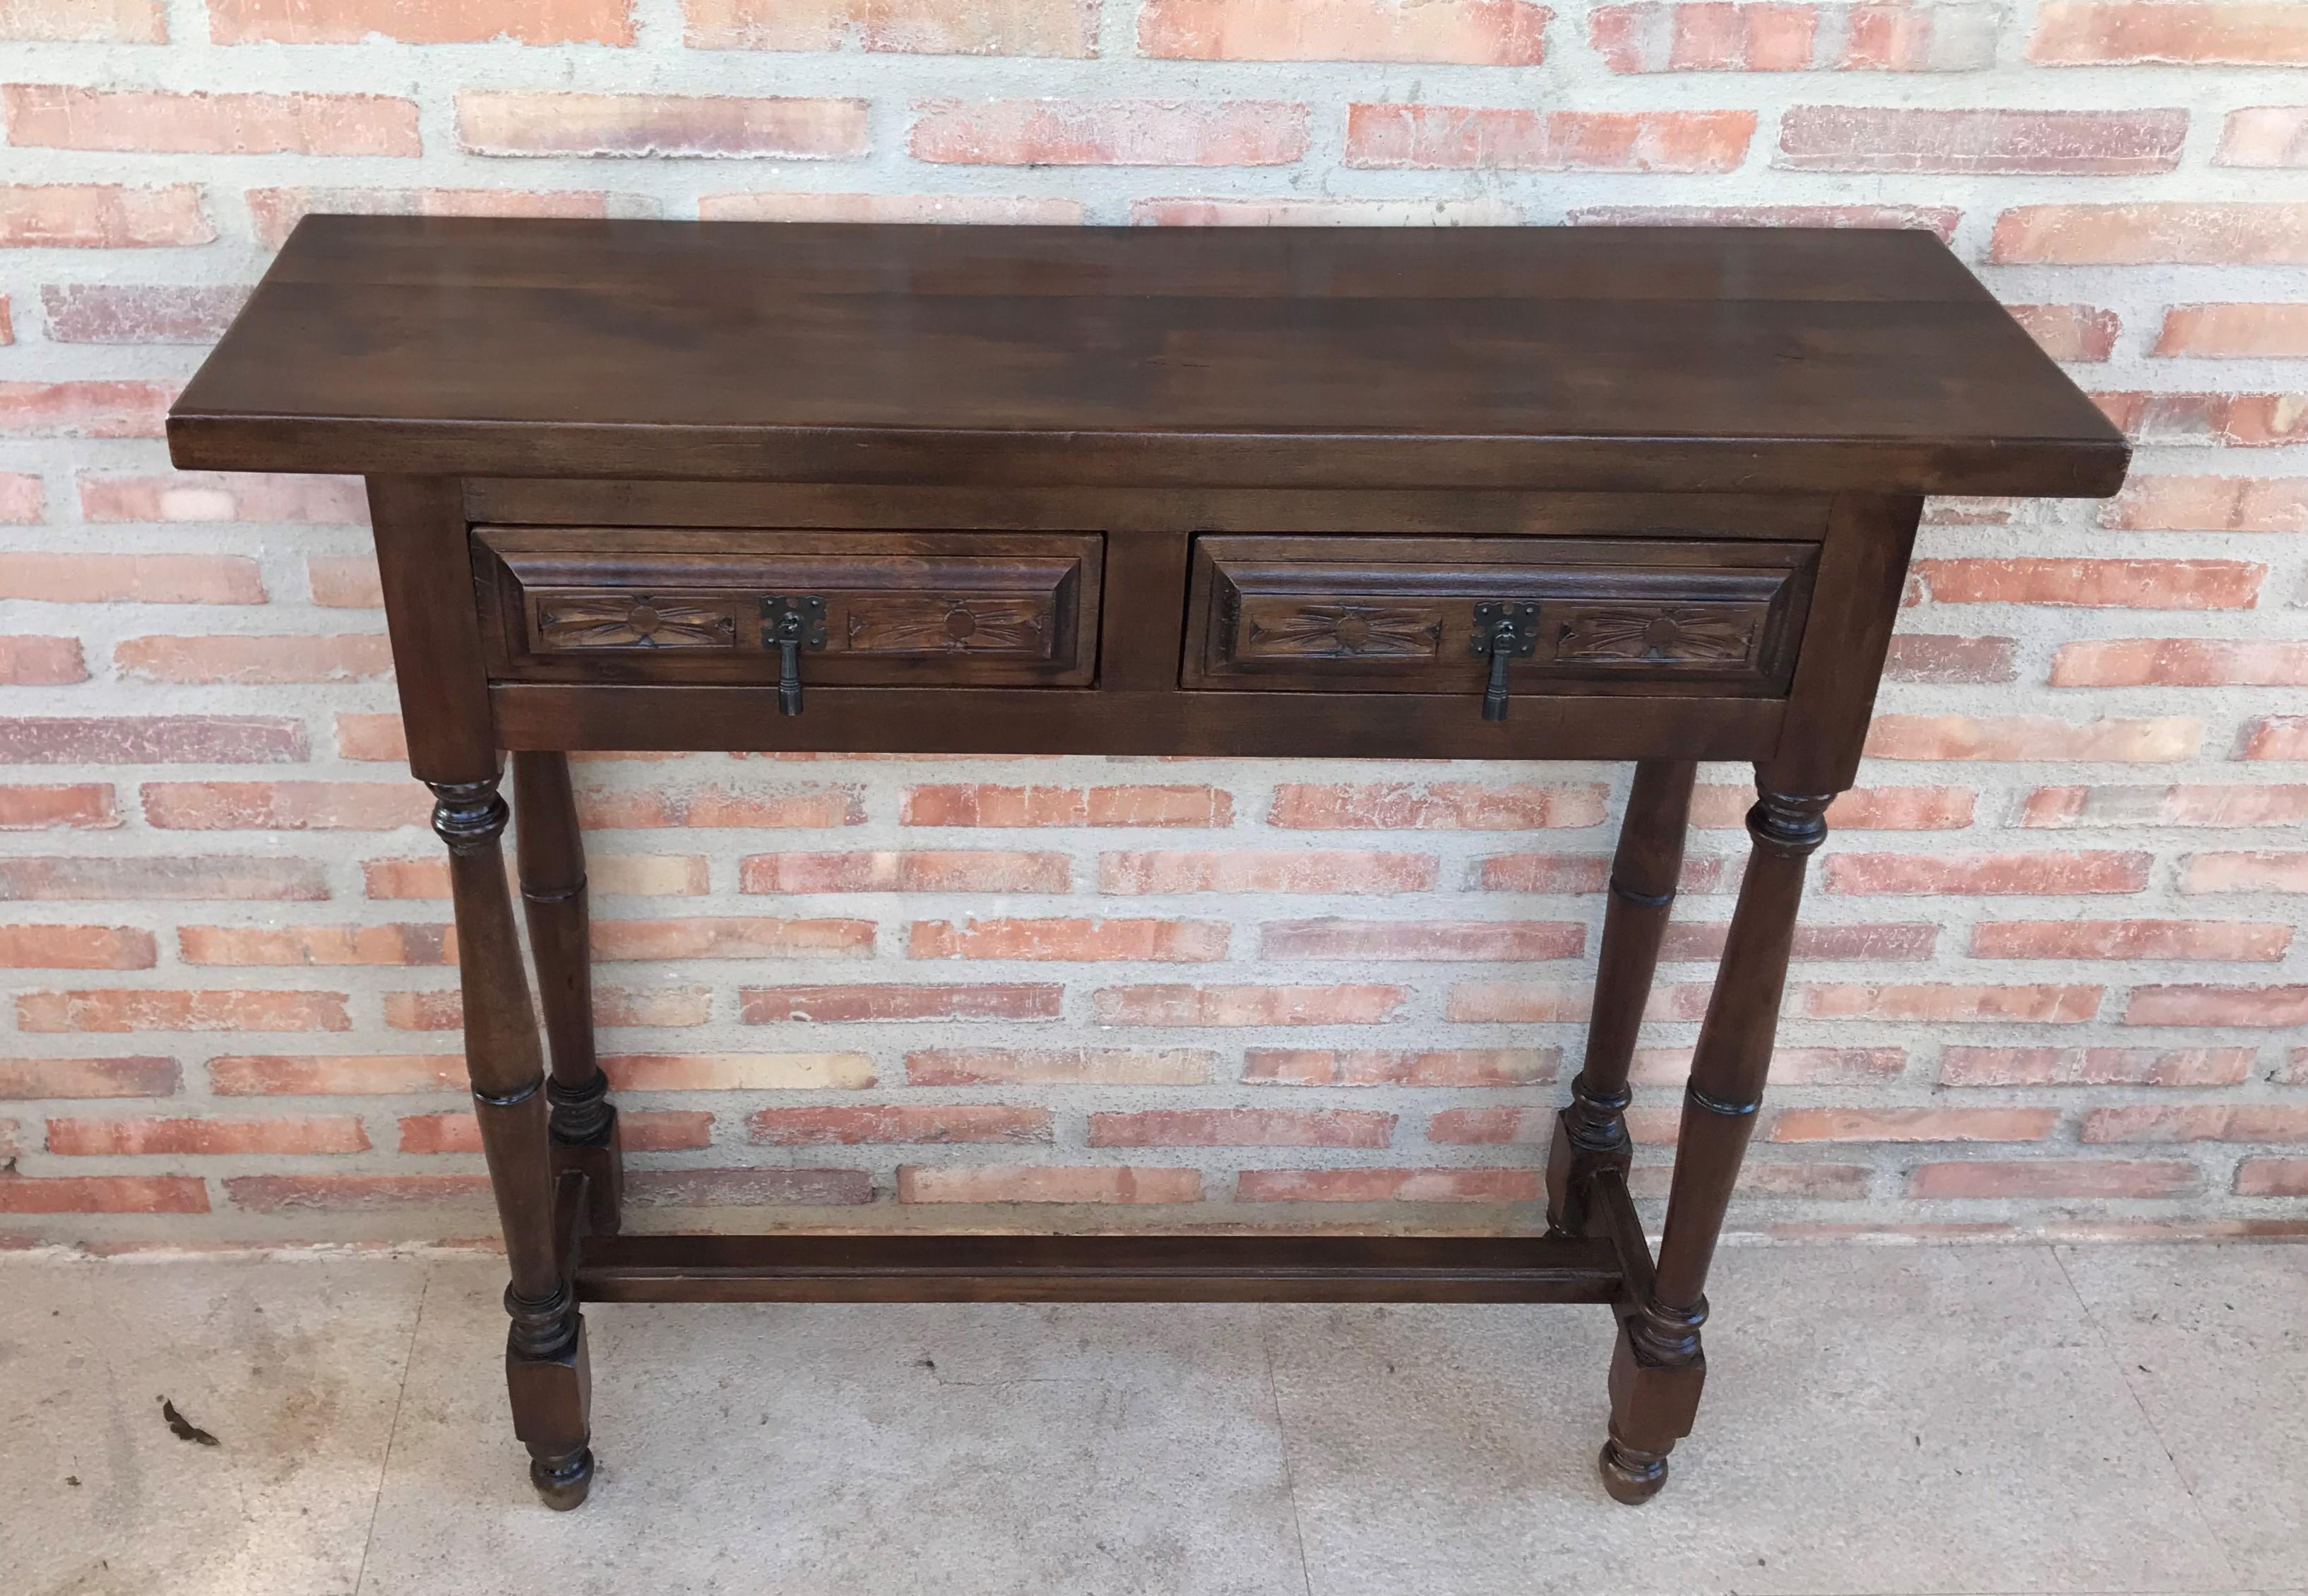 Spanish Baroque carved walnut console table with two drawers, circa 1890.